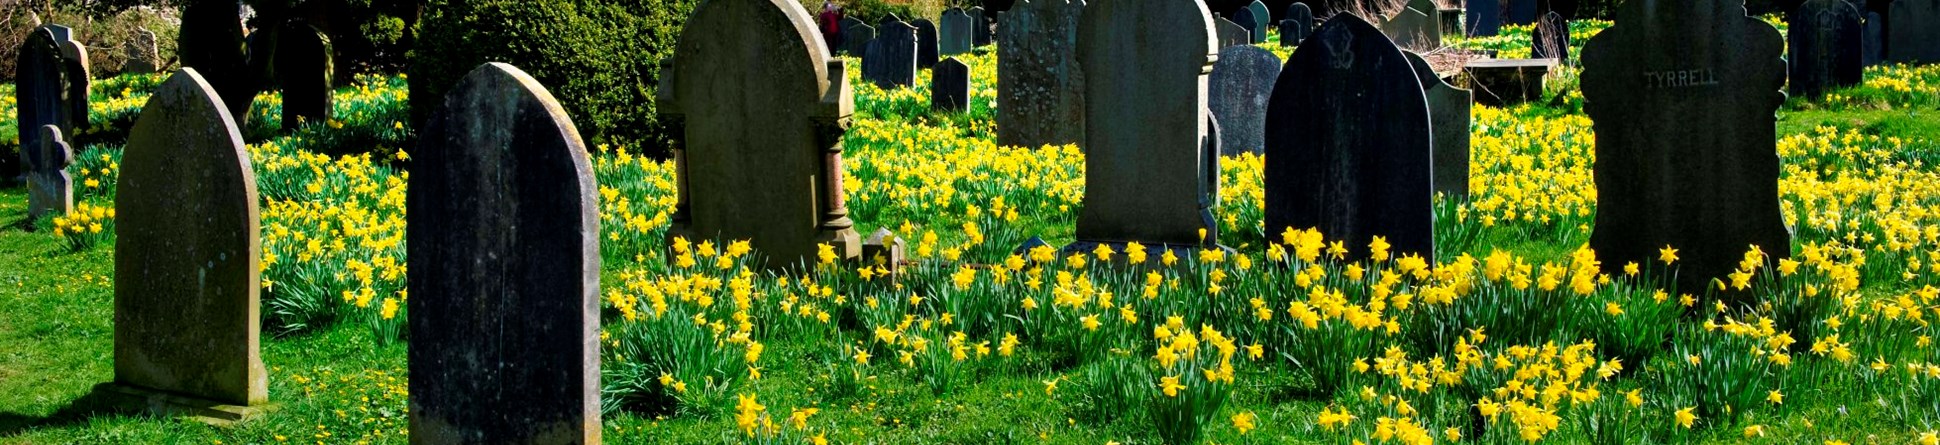 Church of St Mary, Kirkby Lonsdale, Cumbria. Daffodils in the churchyard among gravestones